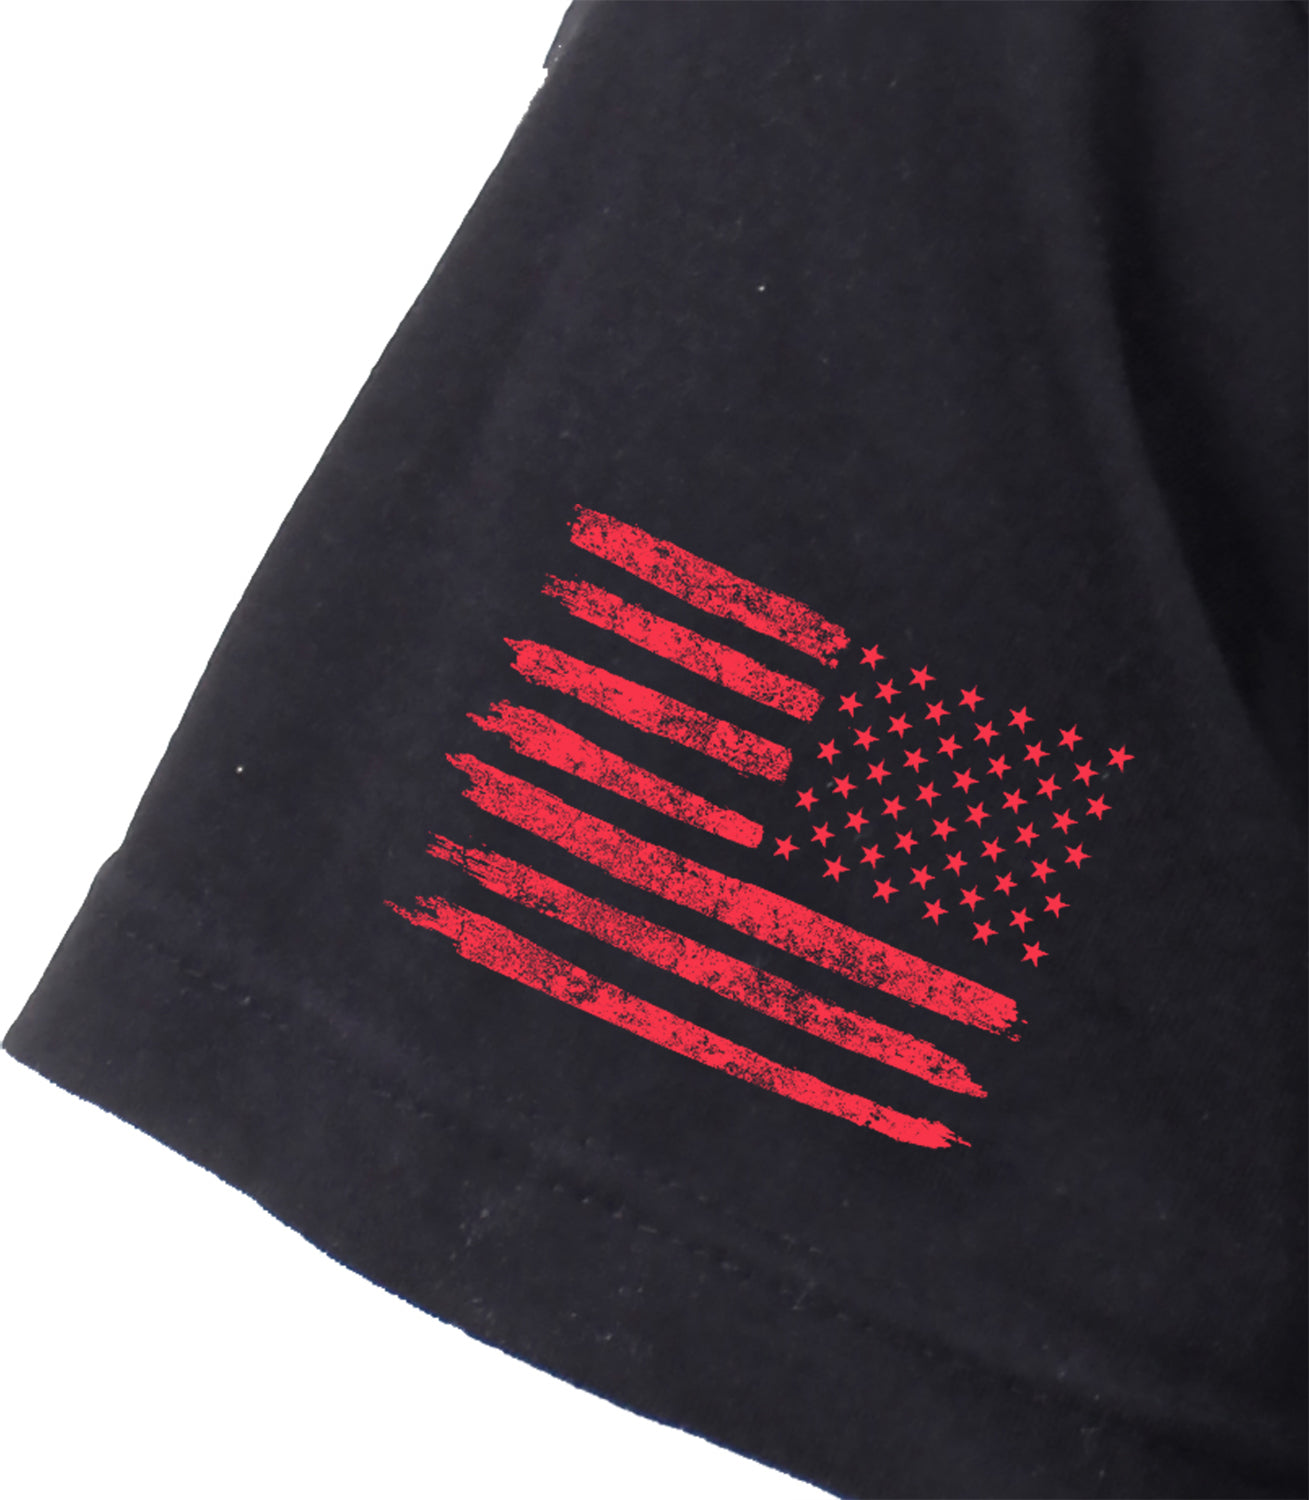 Rothco Athletic Fit R.E.D. (Remember Everyone Deployed) T-Shirt - Black